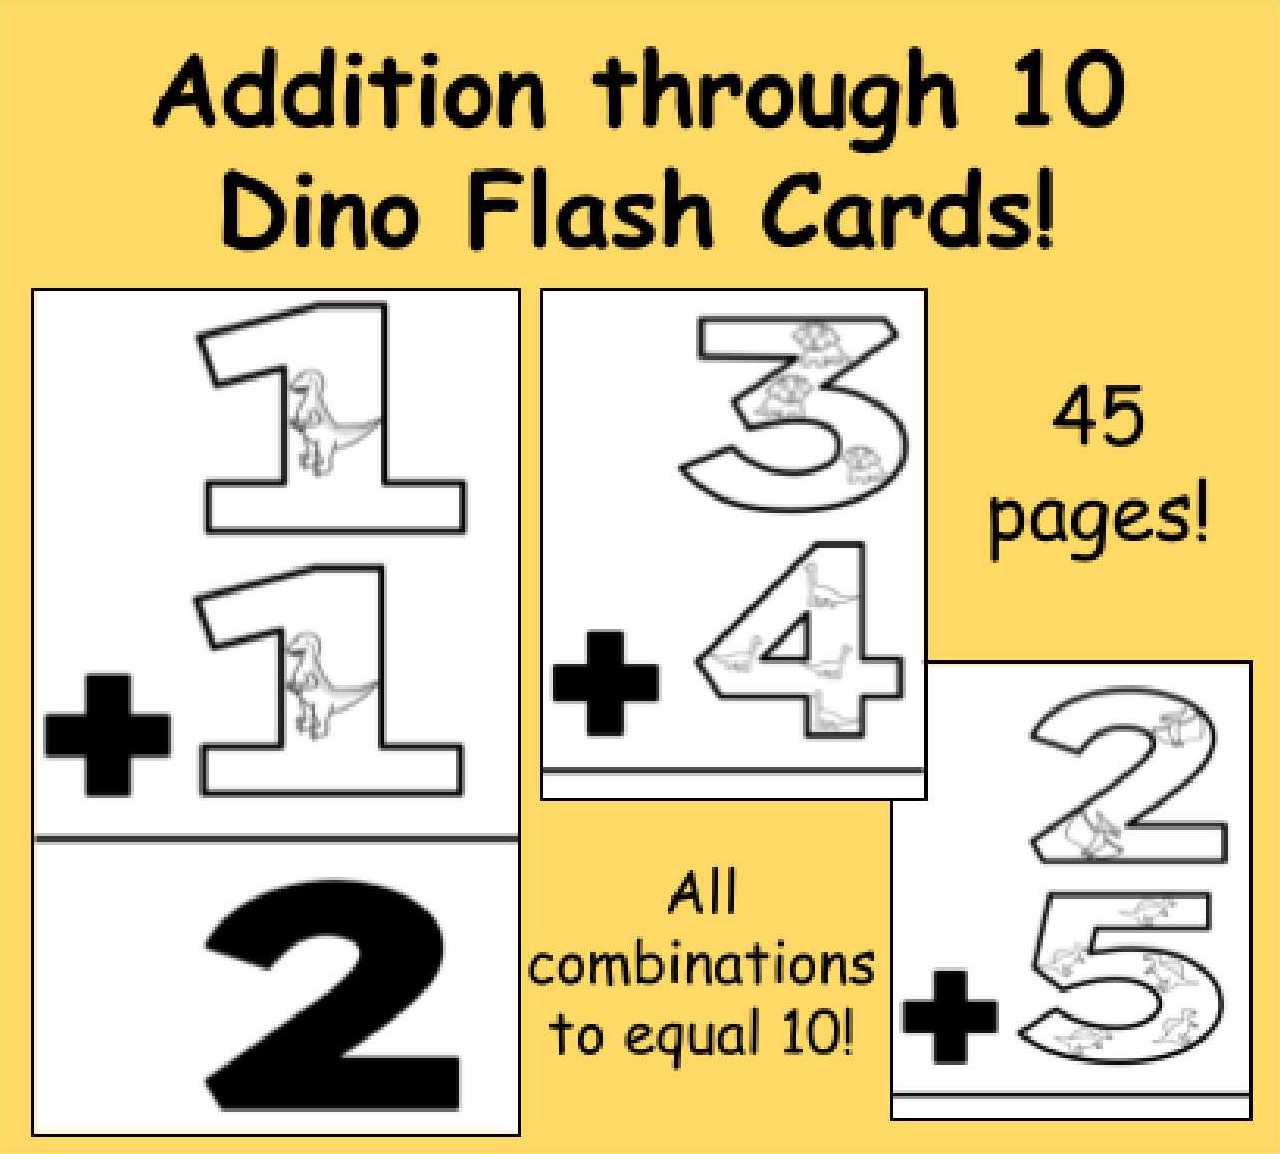 Addition through 10 Dino Flash Cards Preview